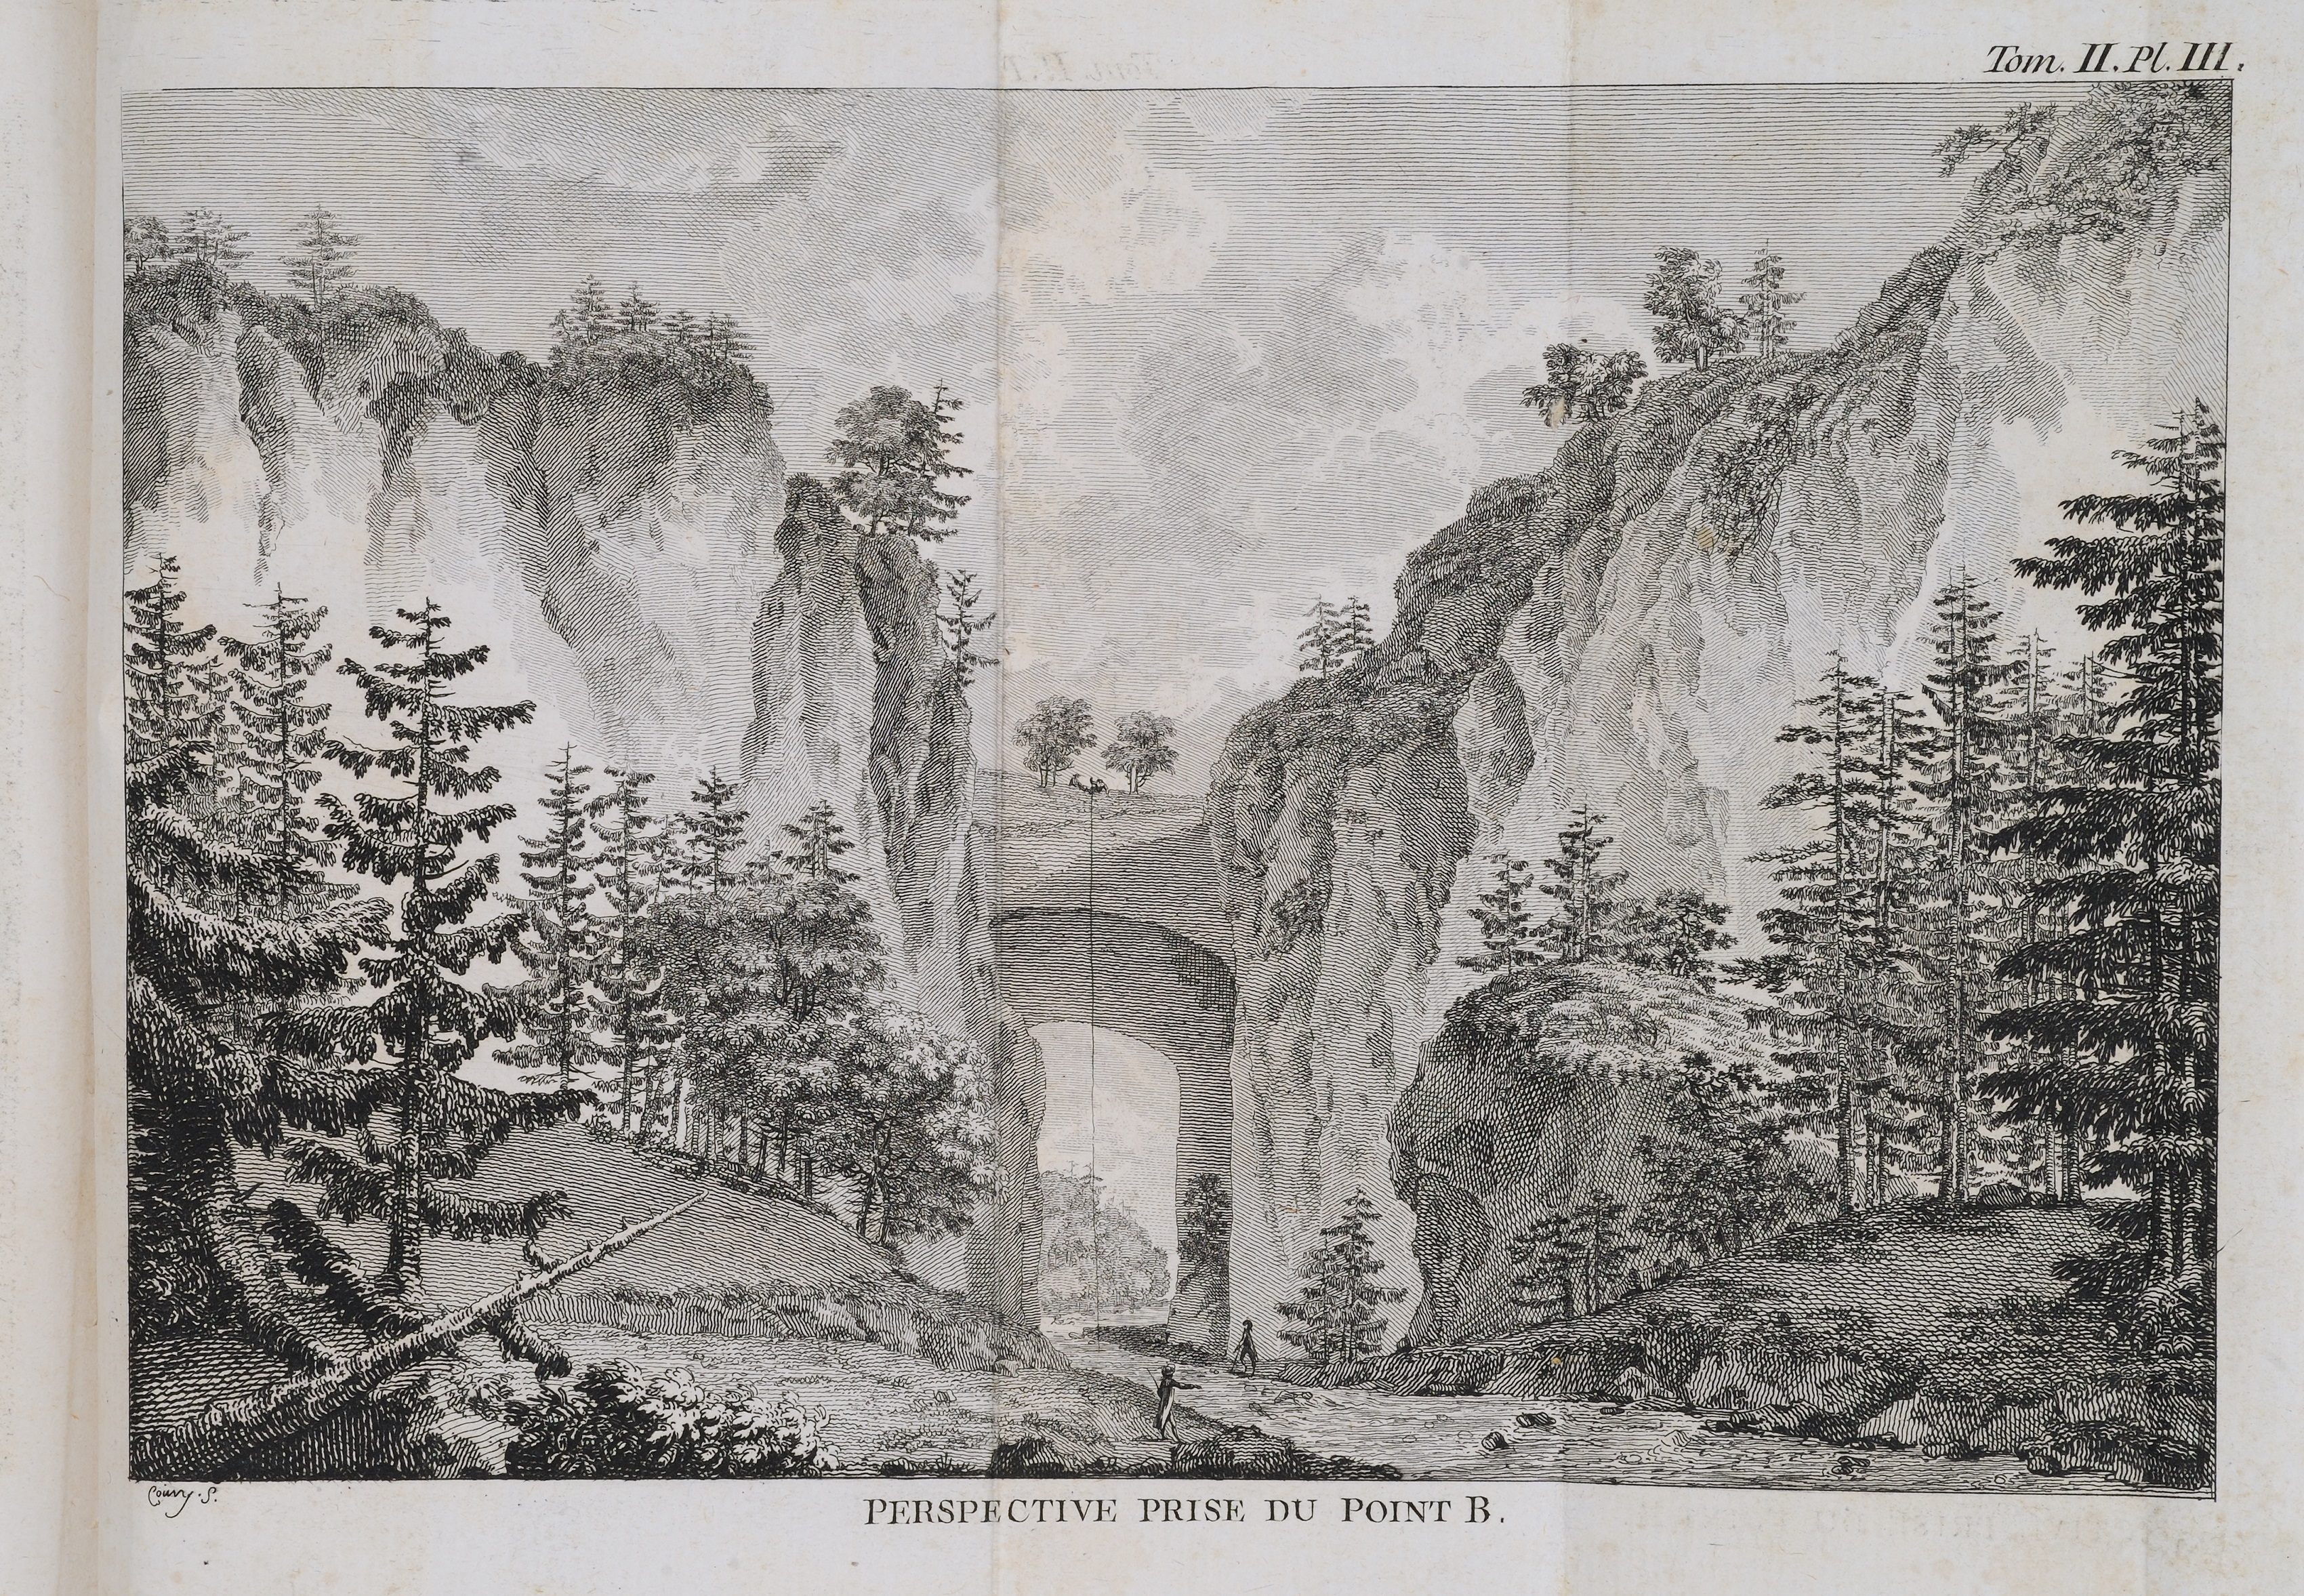 Natural Bridge engraving from Chastellux, 1786